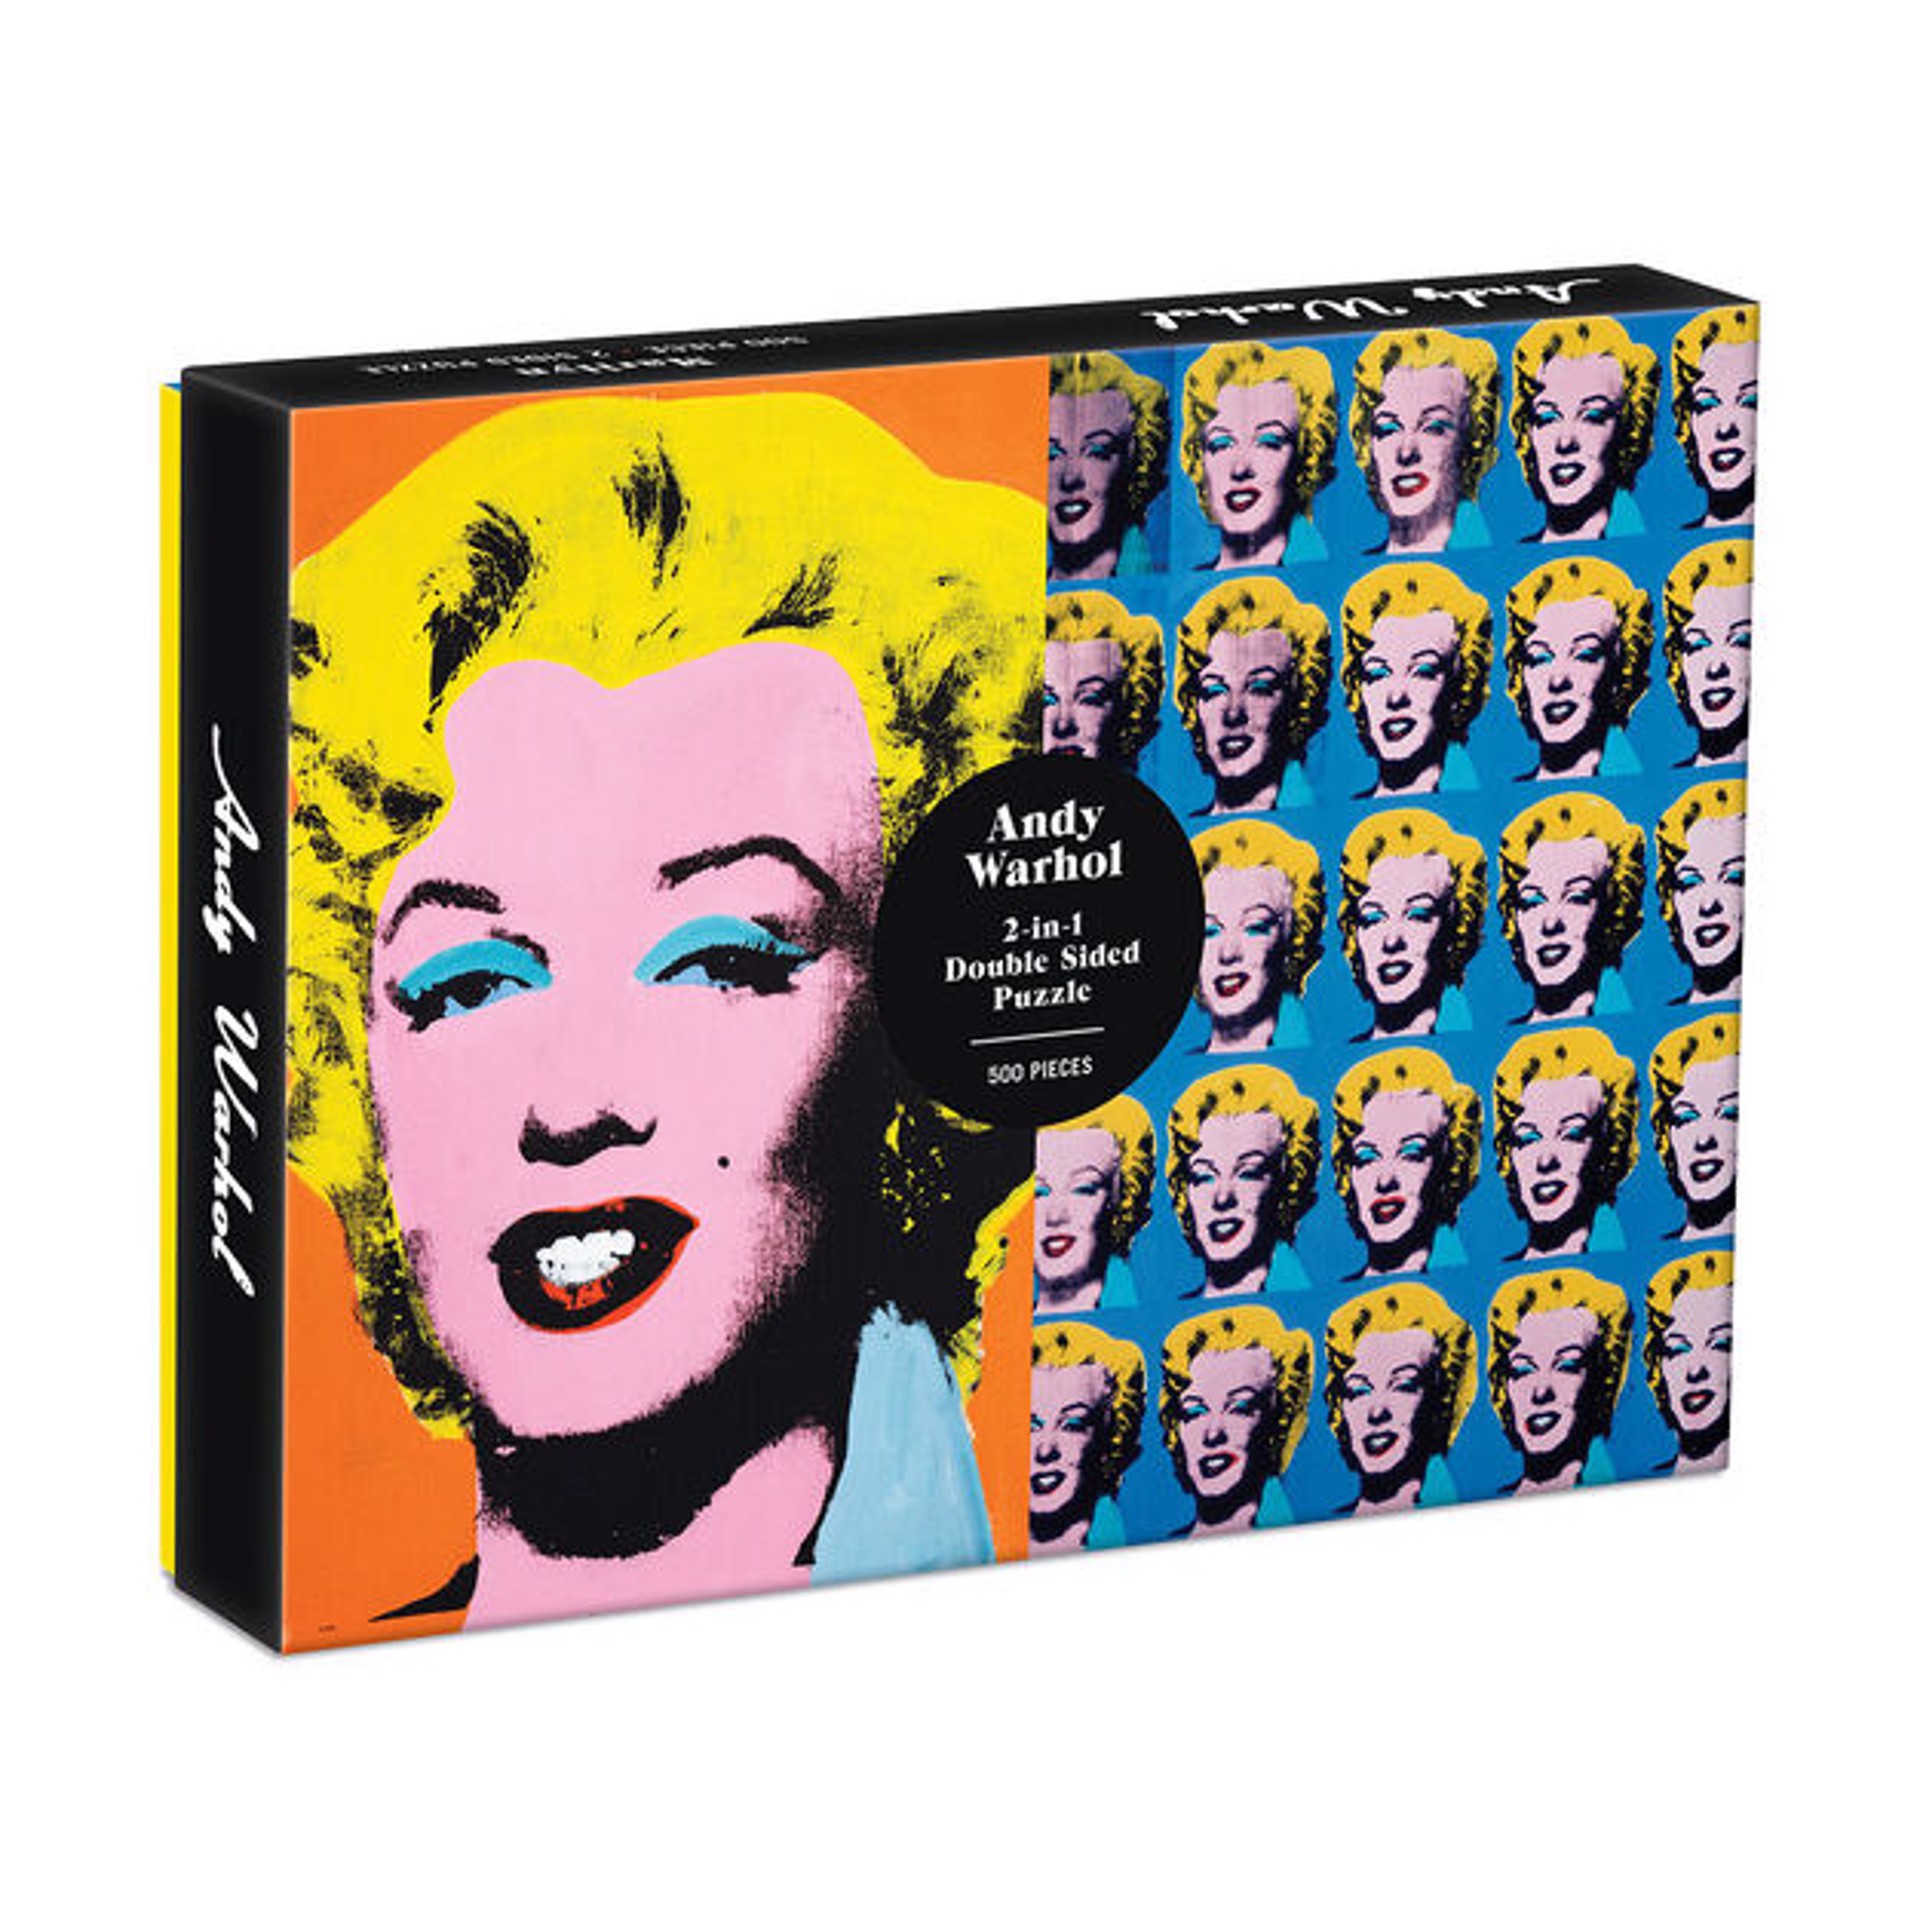 Andy Warhol Double-Sided Marilyn Jigsaw Puzzle - 500 Pieces by Andy Warhol